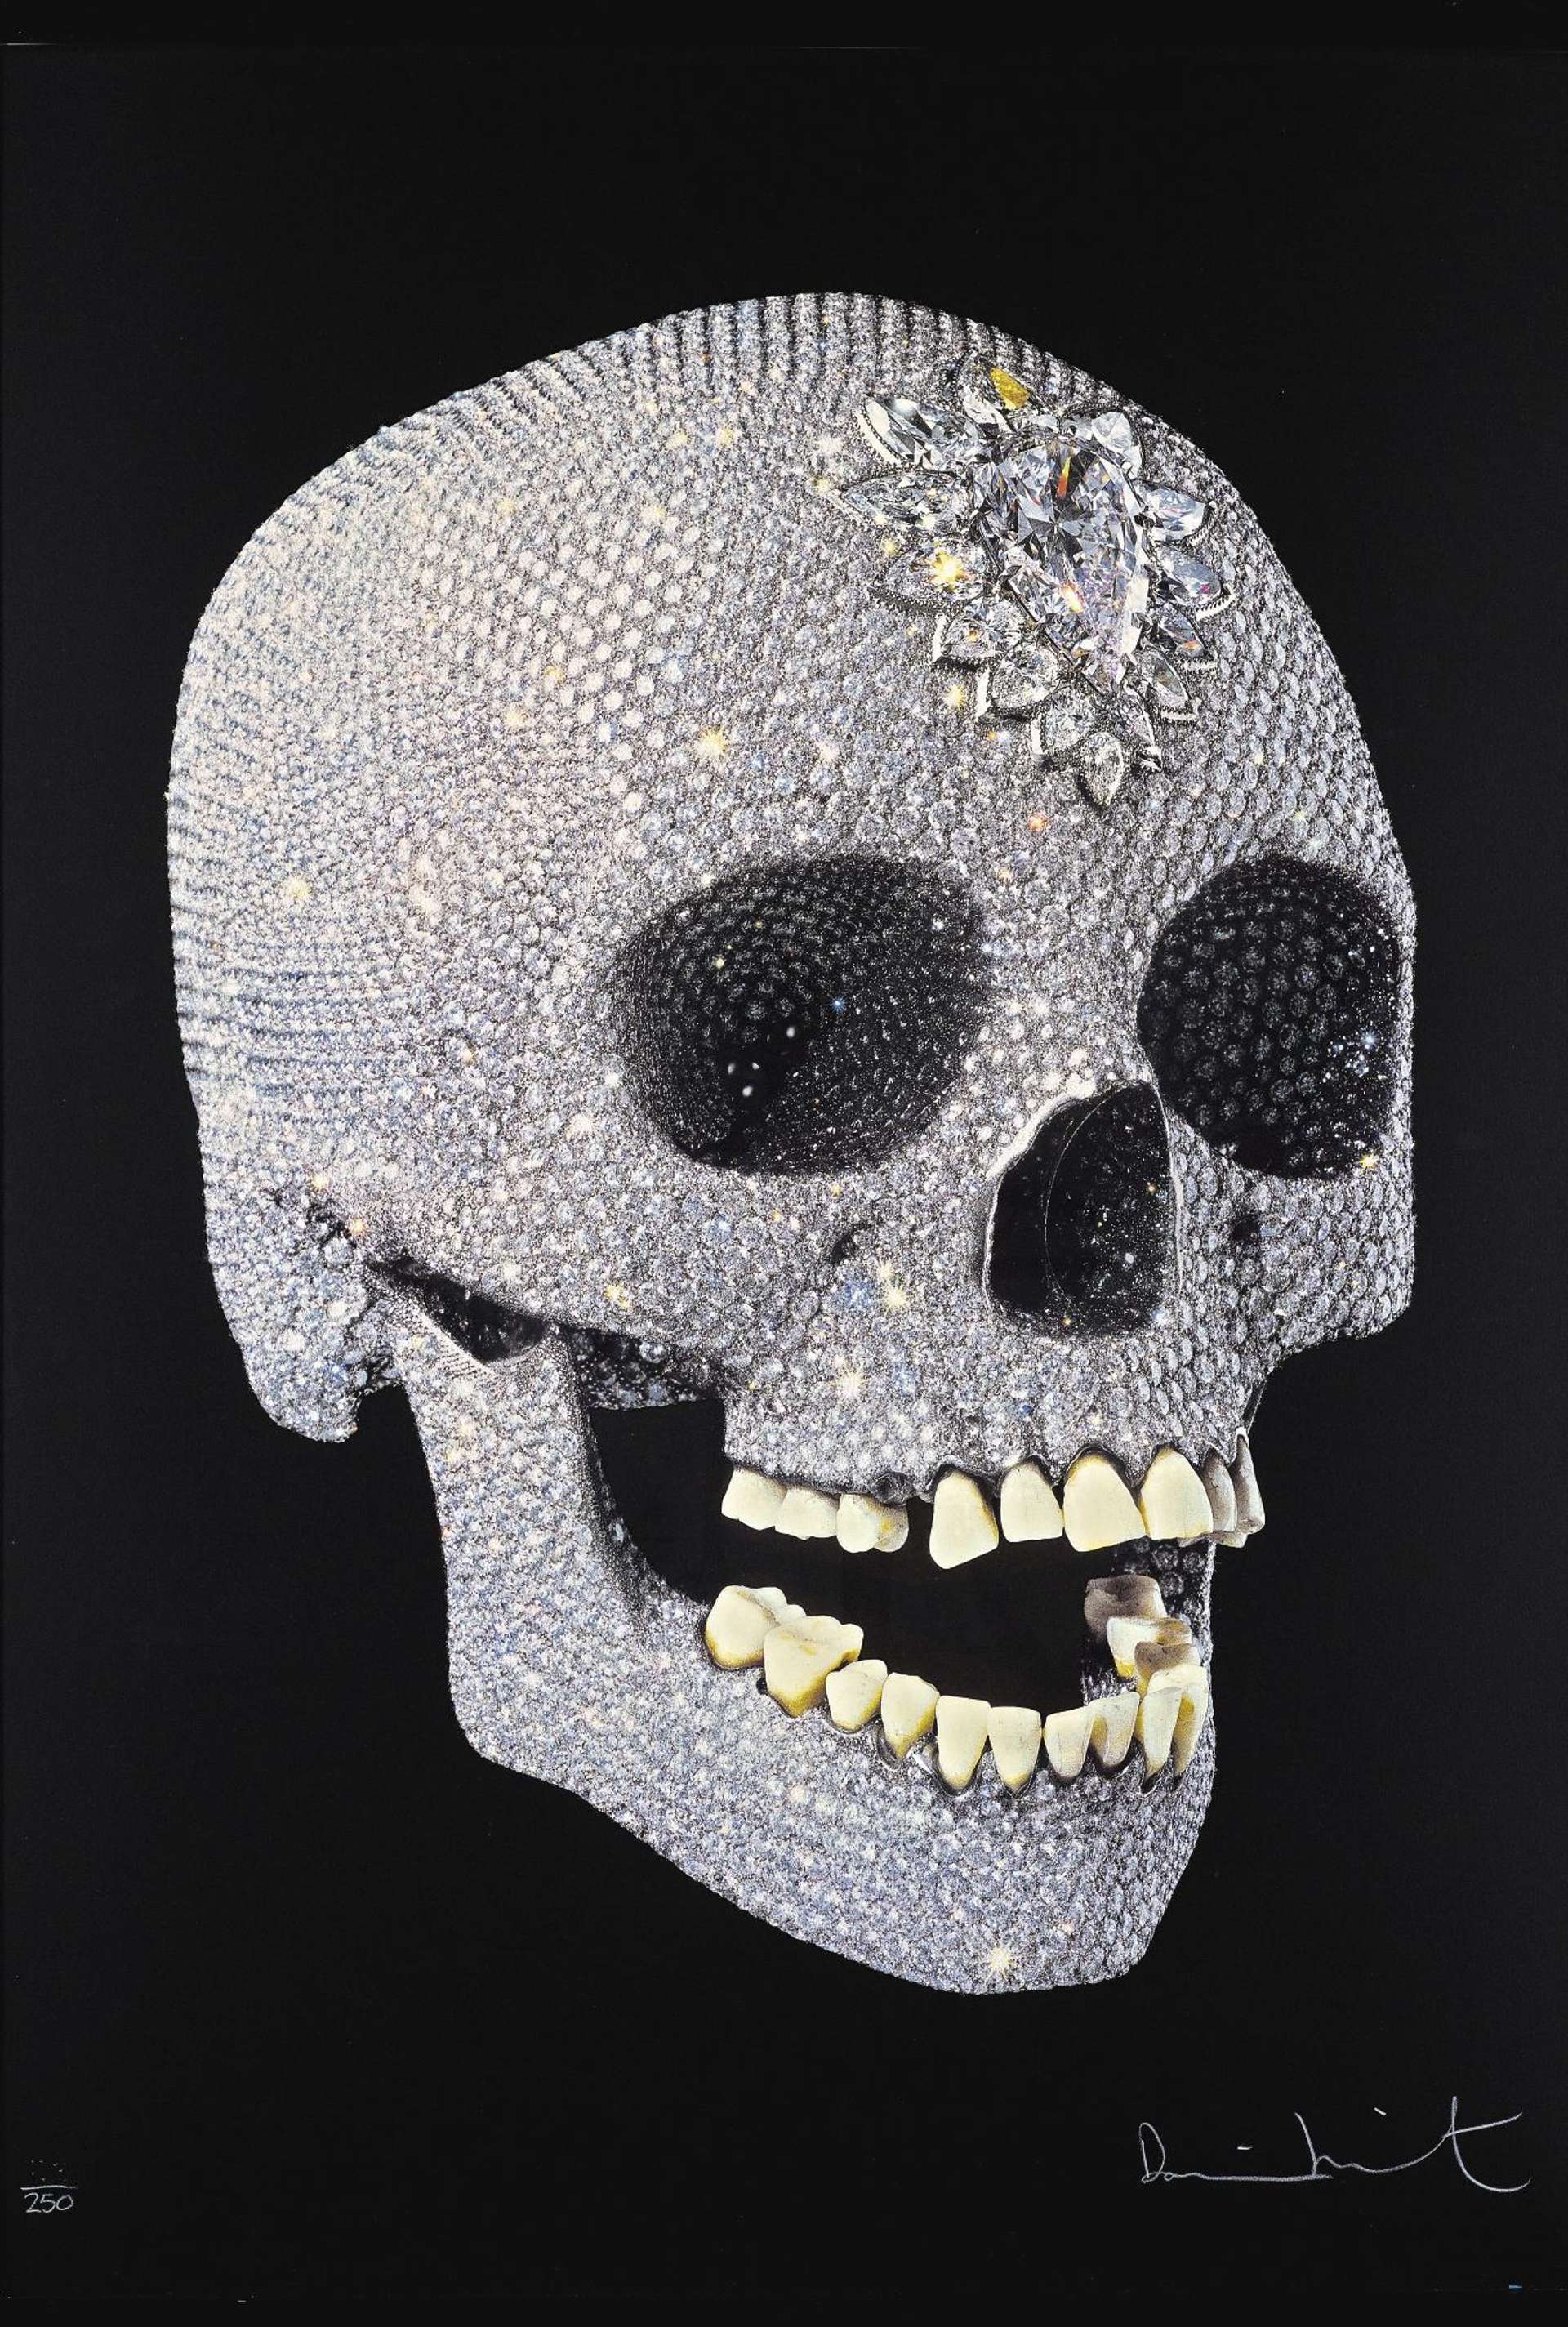 For The Love of God by Damien Hirst